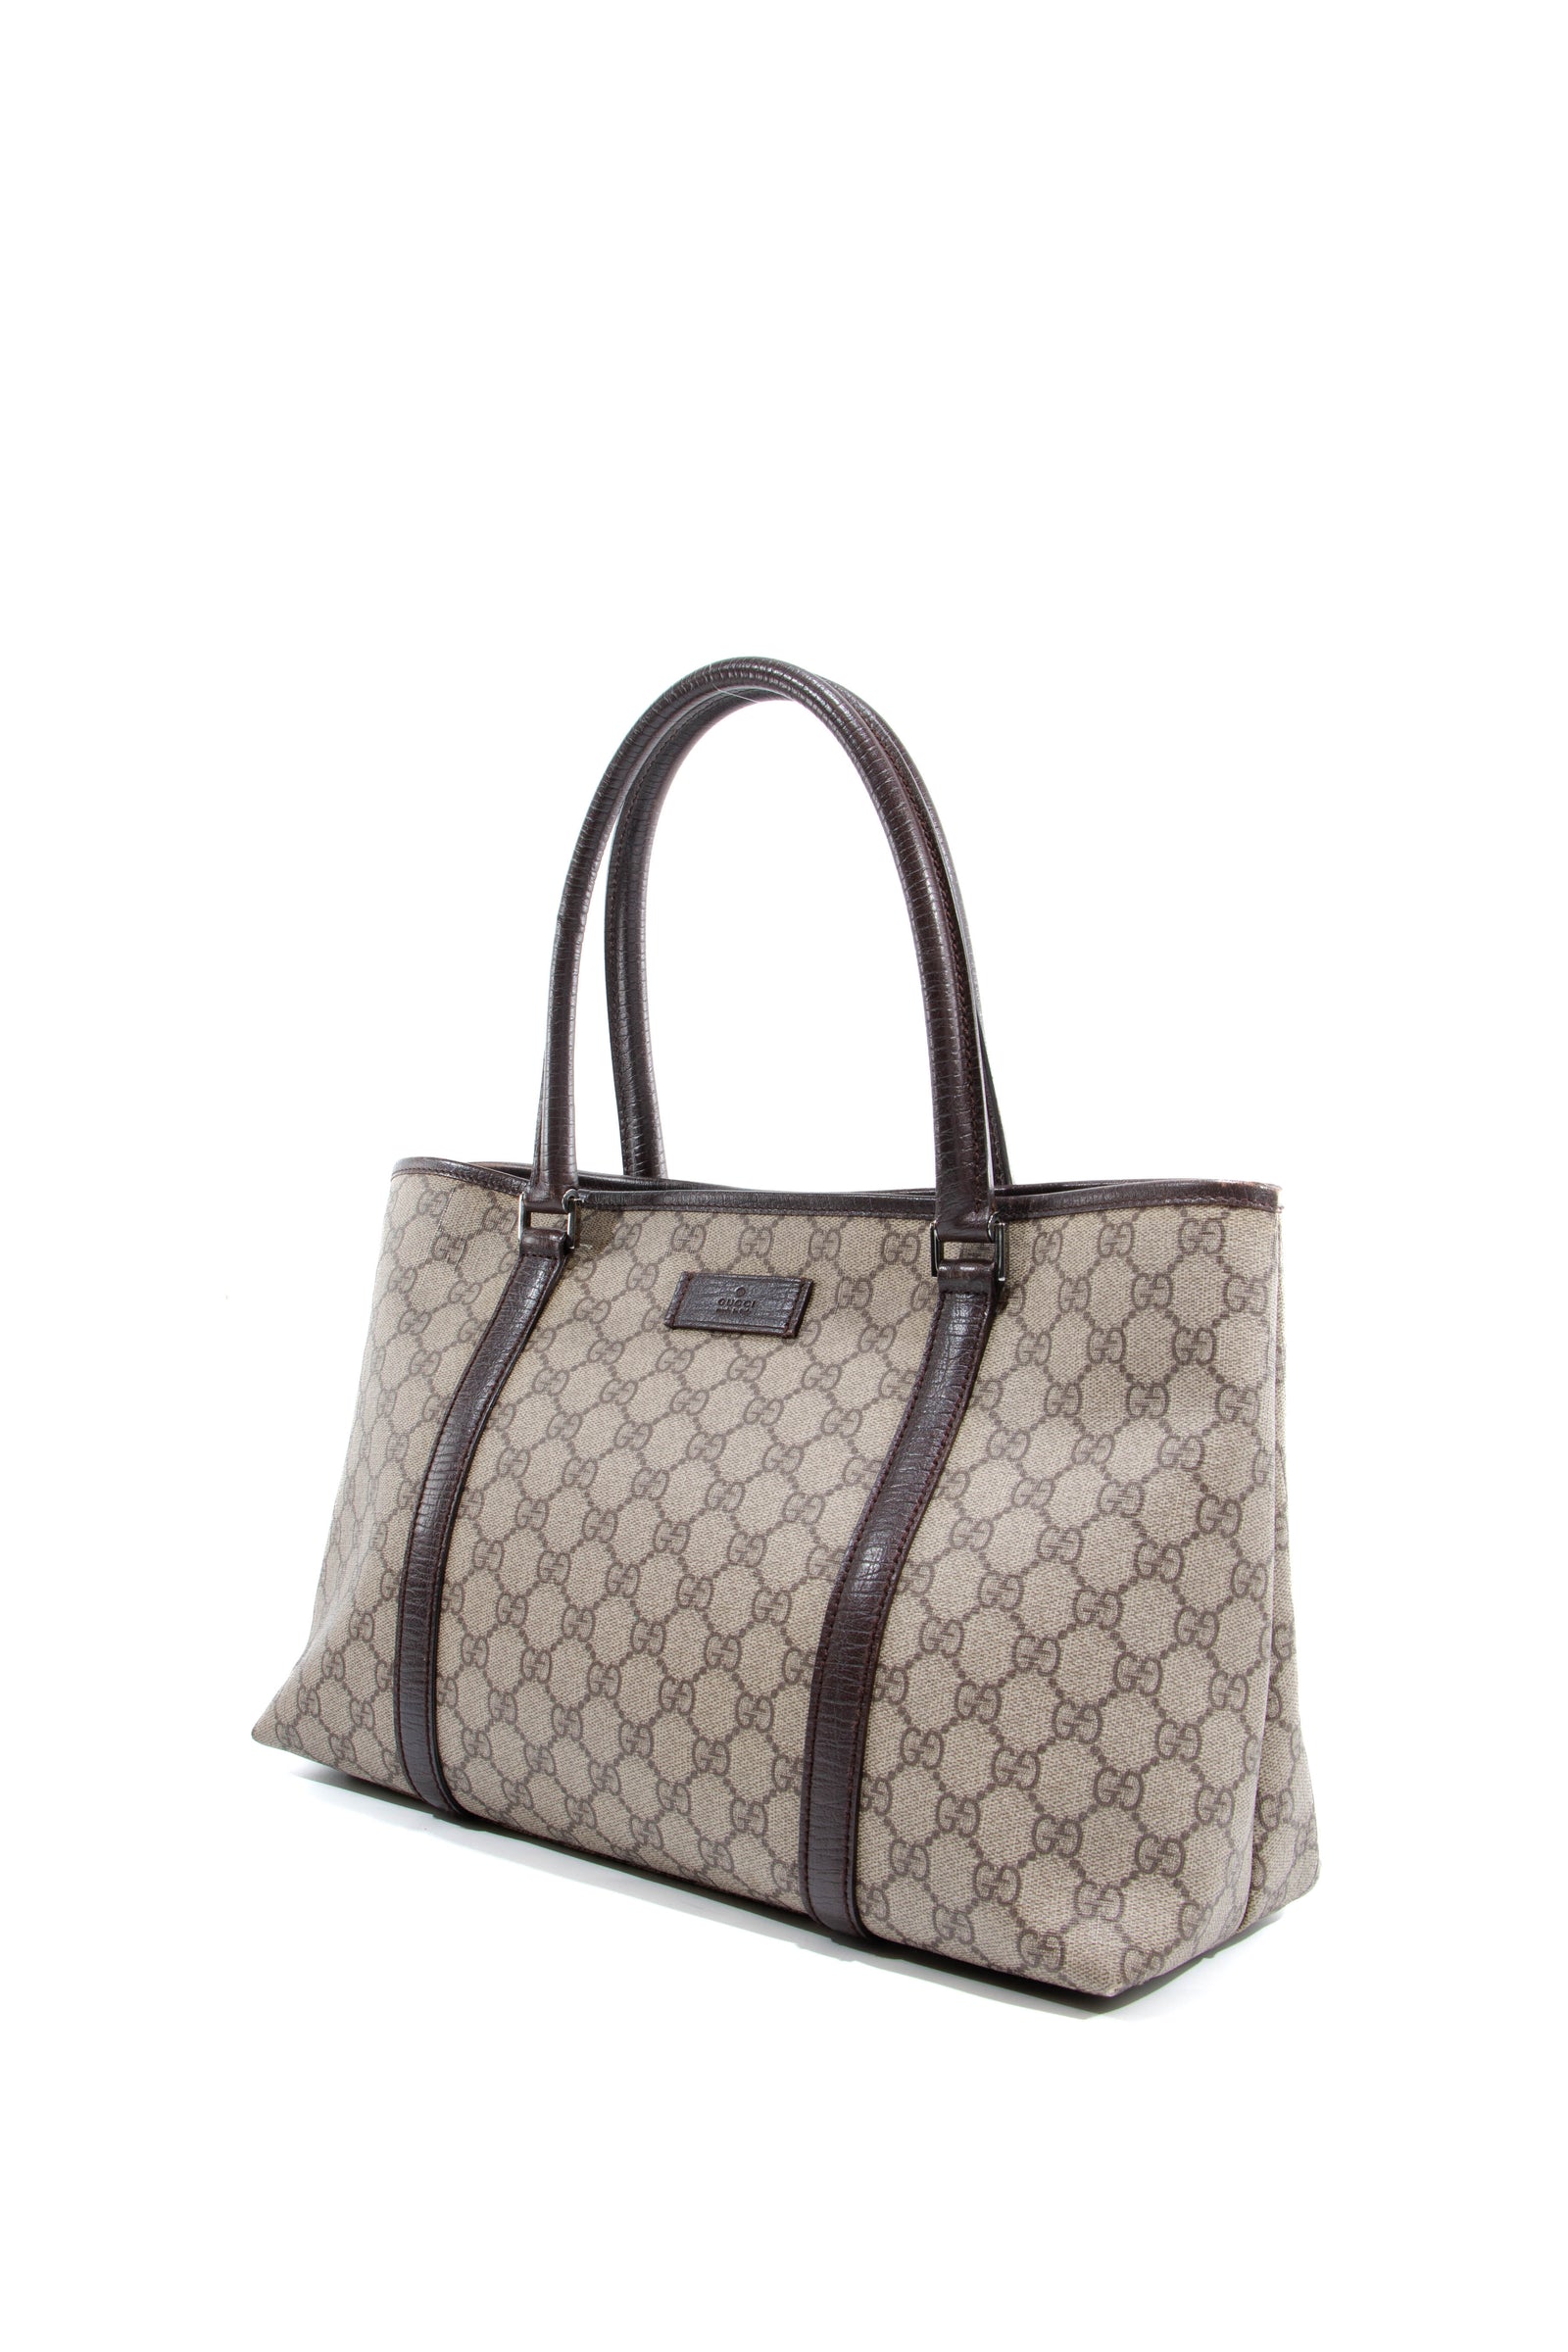 Gucci bags  Best selection of second-hand Gucci – Collectors cage